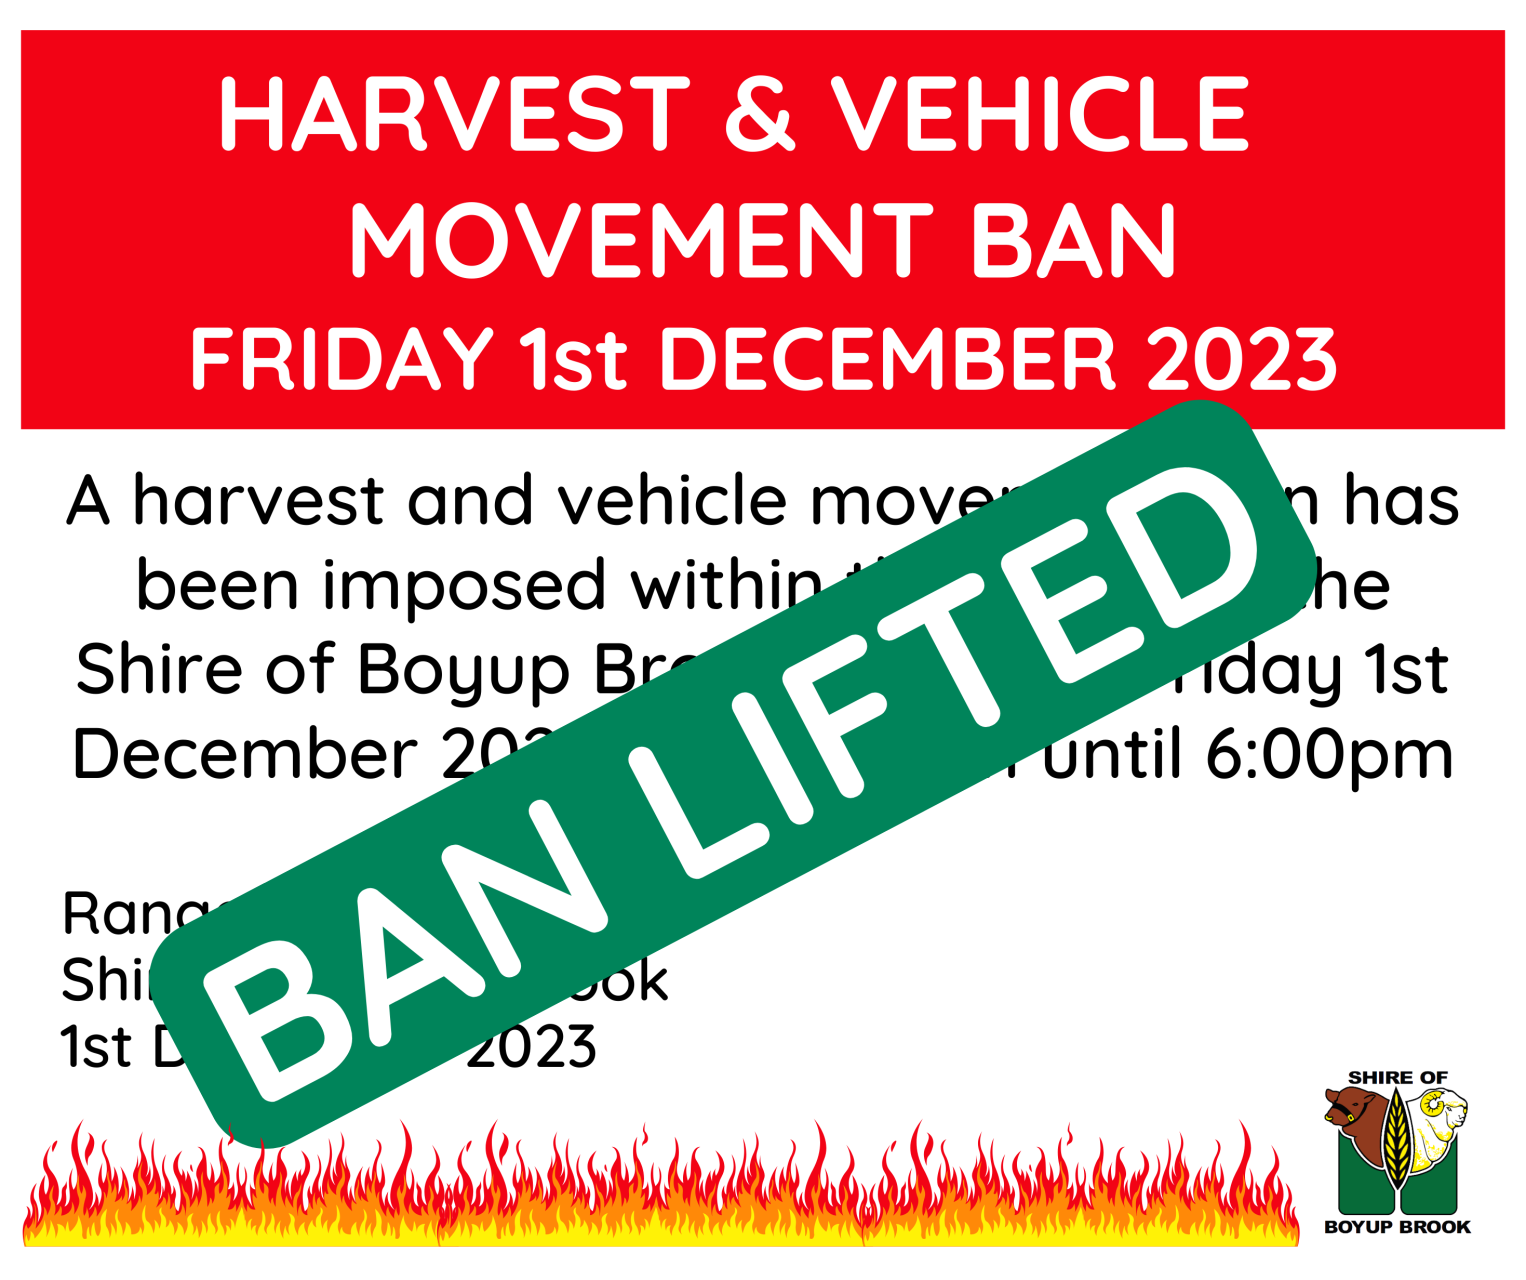 Harvest and Vehicle Movement Ban Friday 1st December 2023 from 1:15pm - 6:00pm